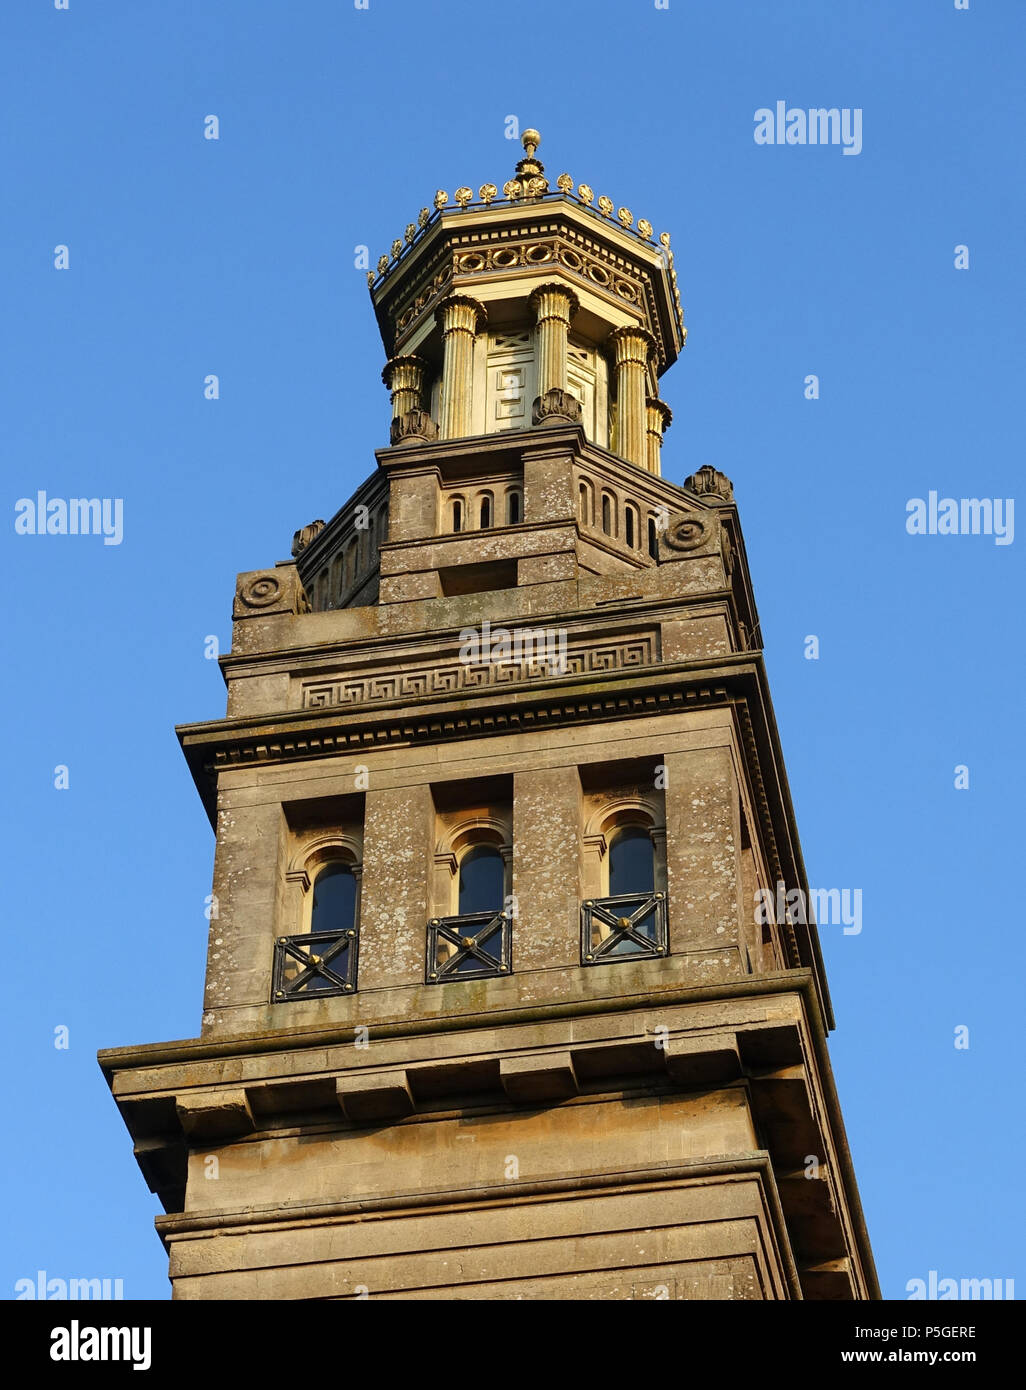 N/A. Anglais : Beckford's Tower - Bath, Angleterre. 24 mai 2016, 01:25:20. Daderot 180 Beckford's Tower - Bath, Angleterre - DSC09687 Banque D'Images